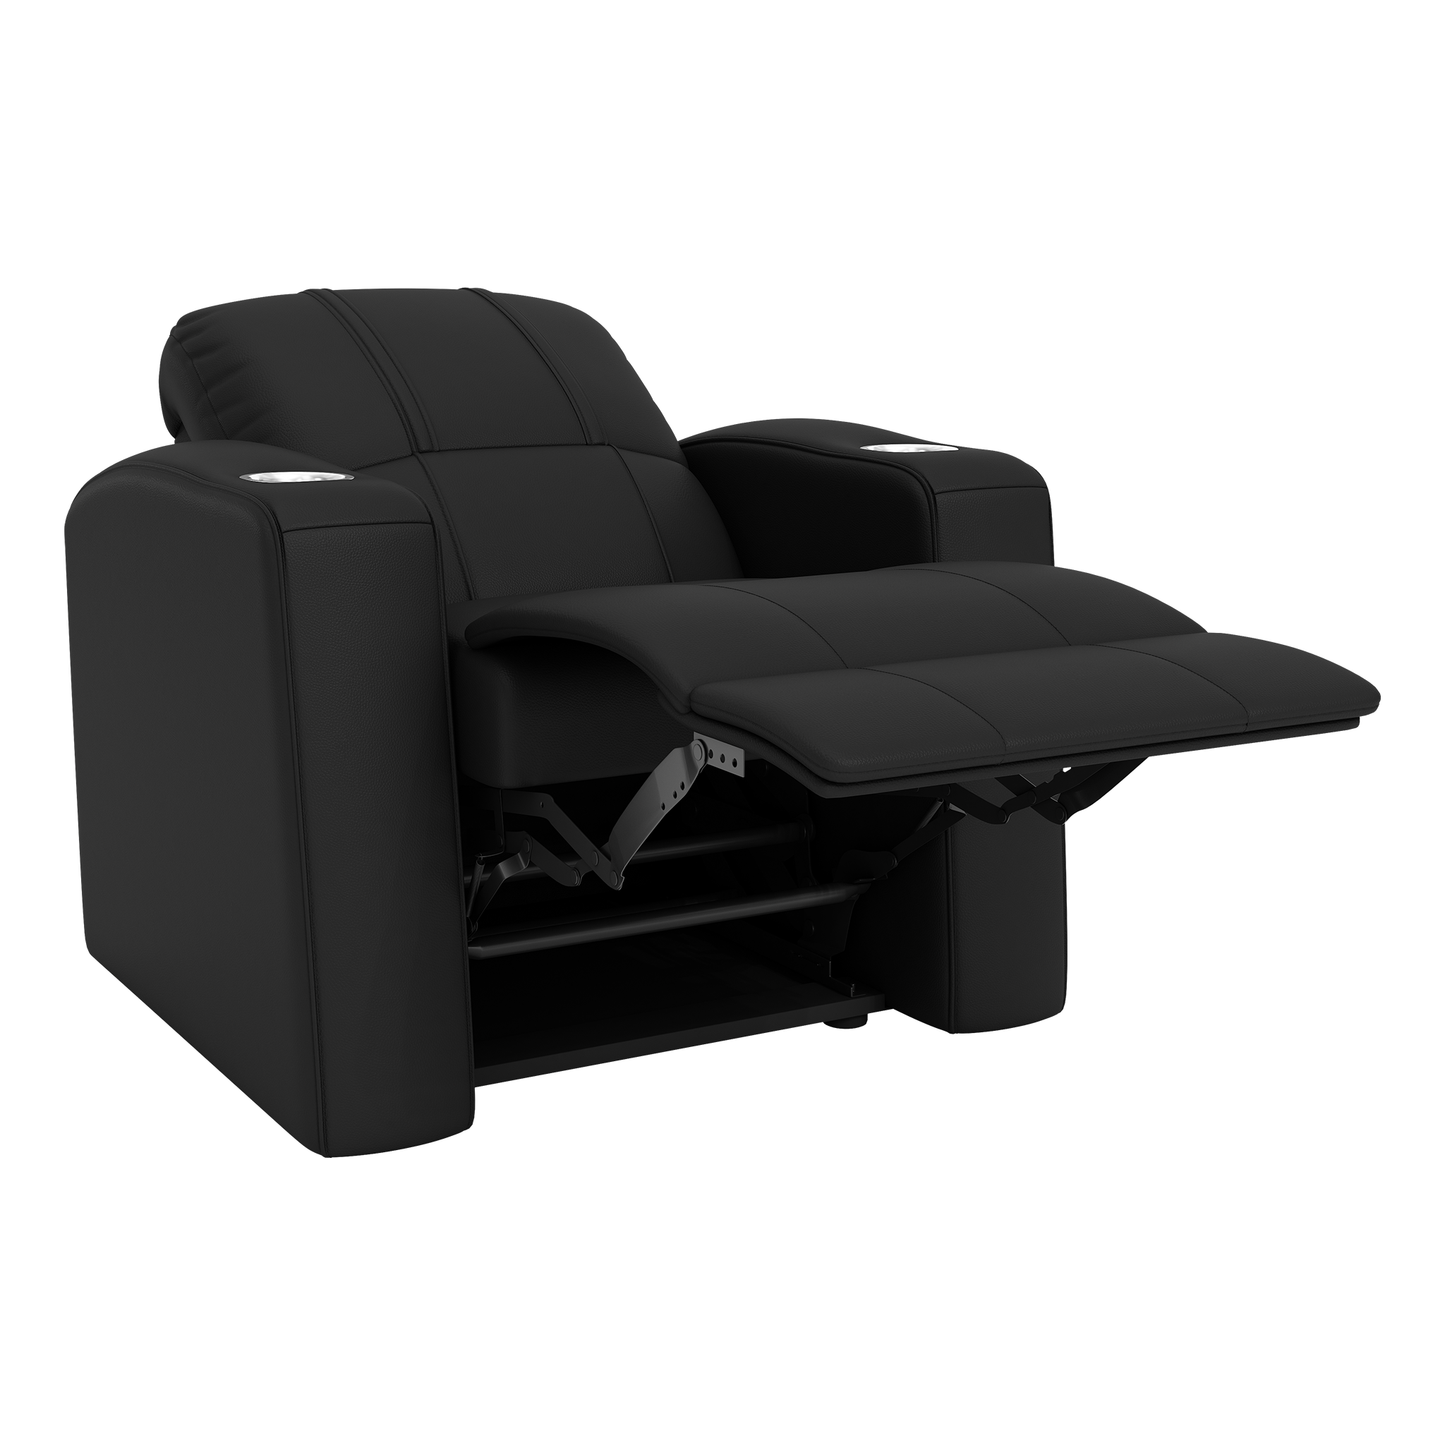 Relax Home Theater Recliner with St Josephs Hawks Logo